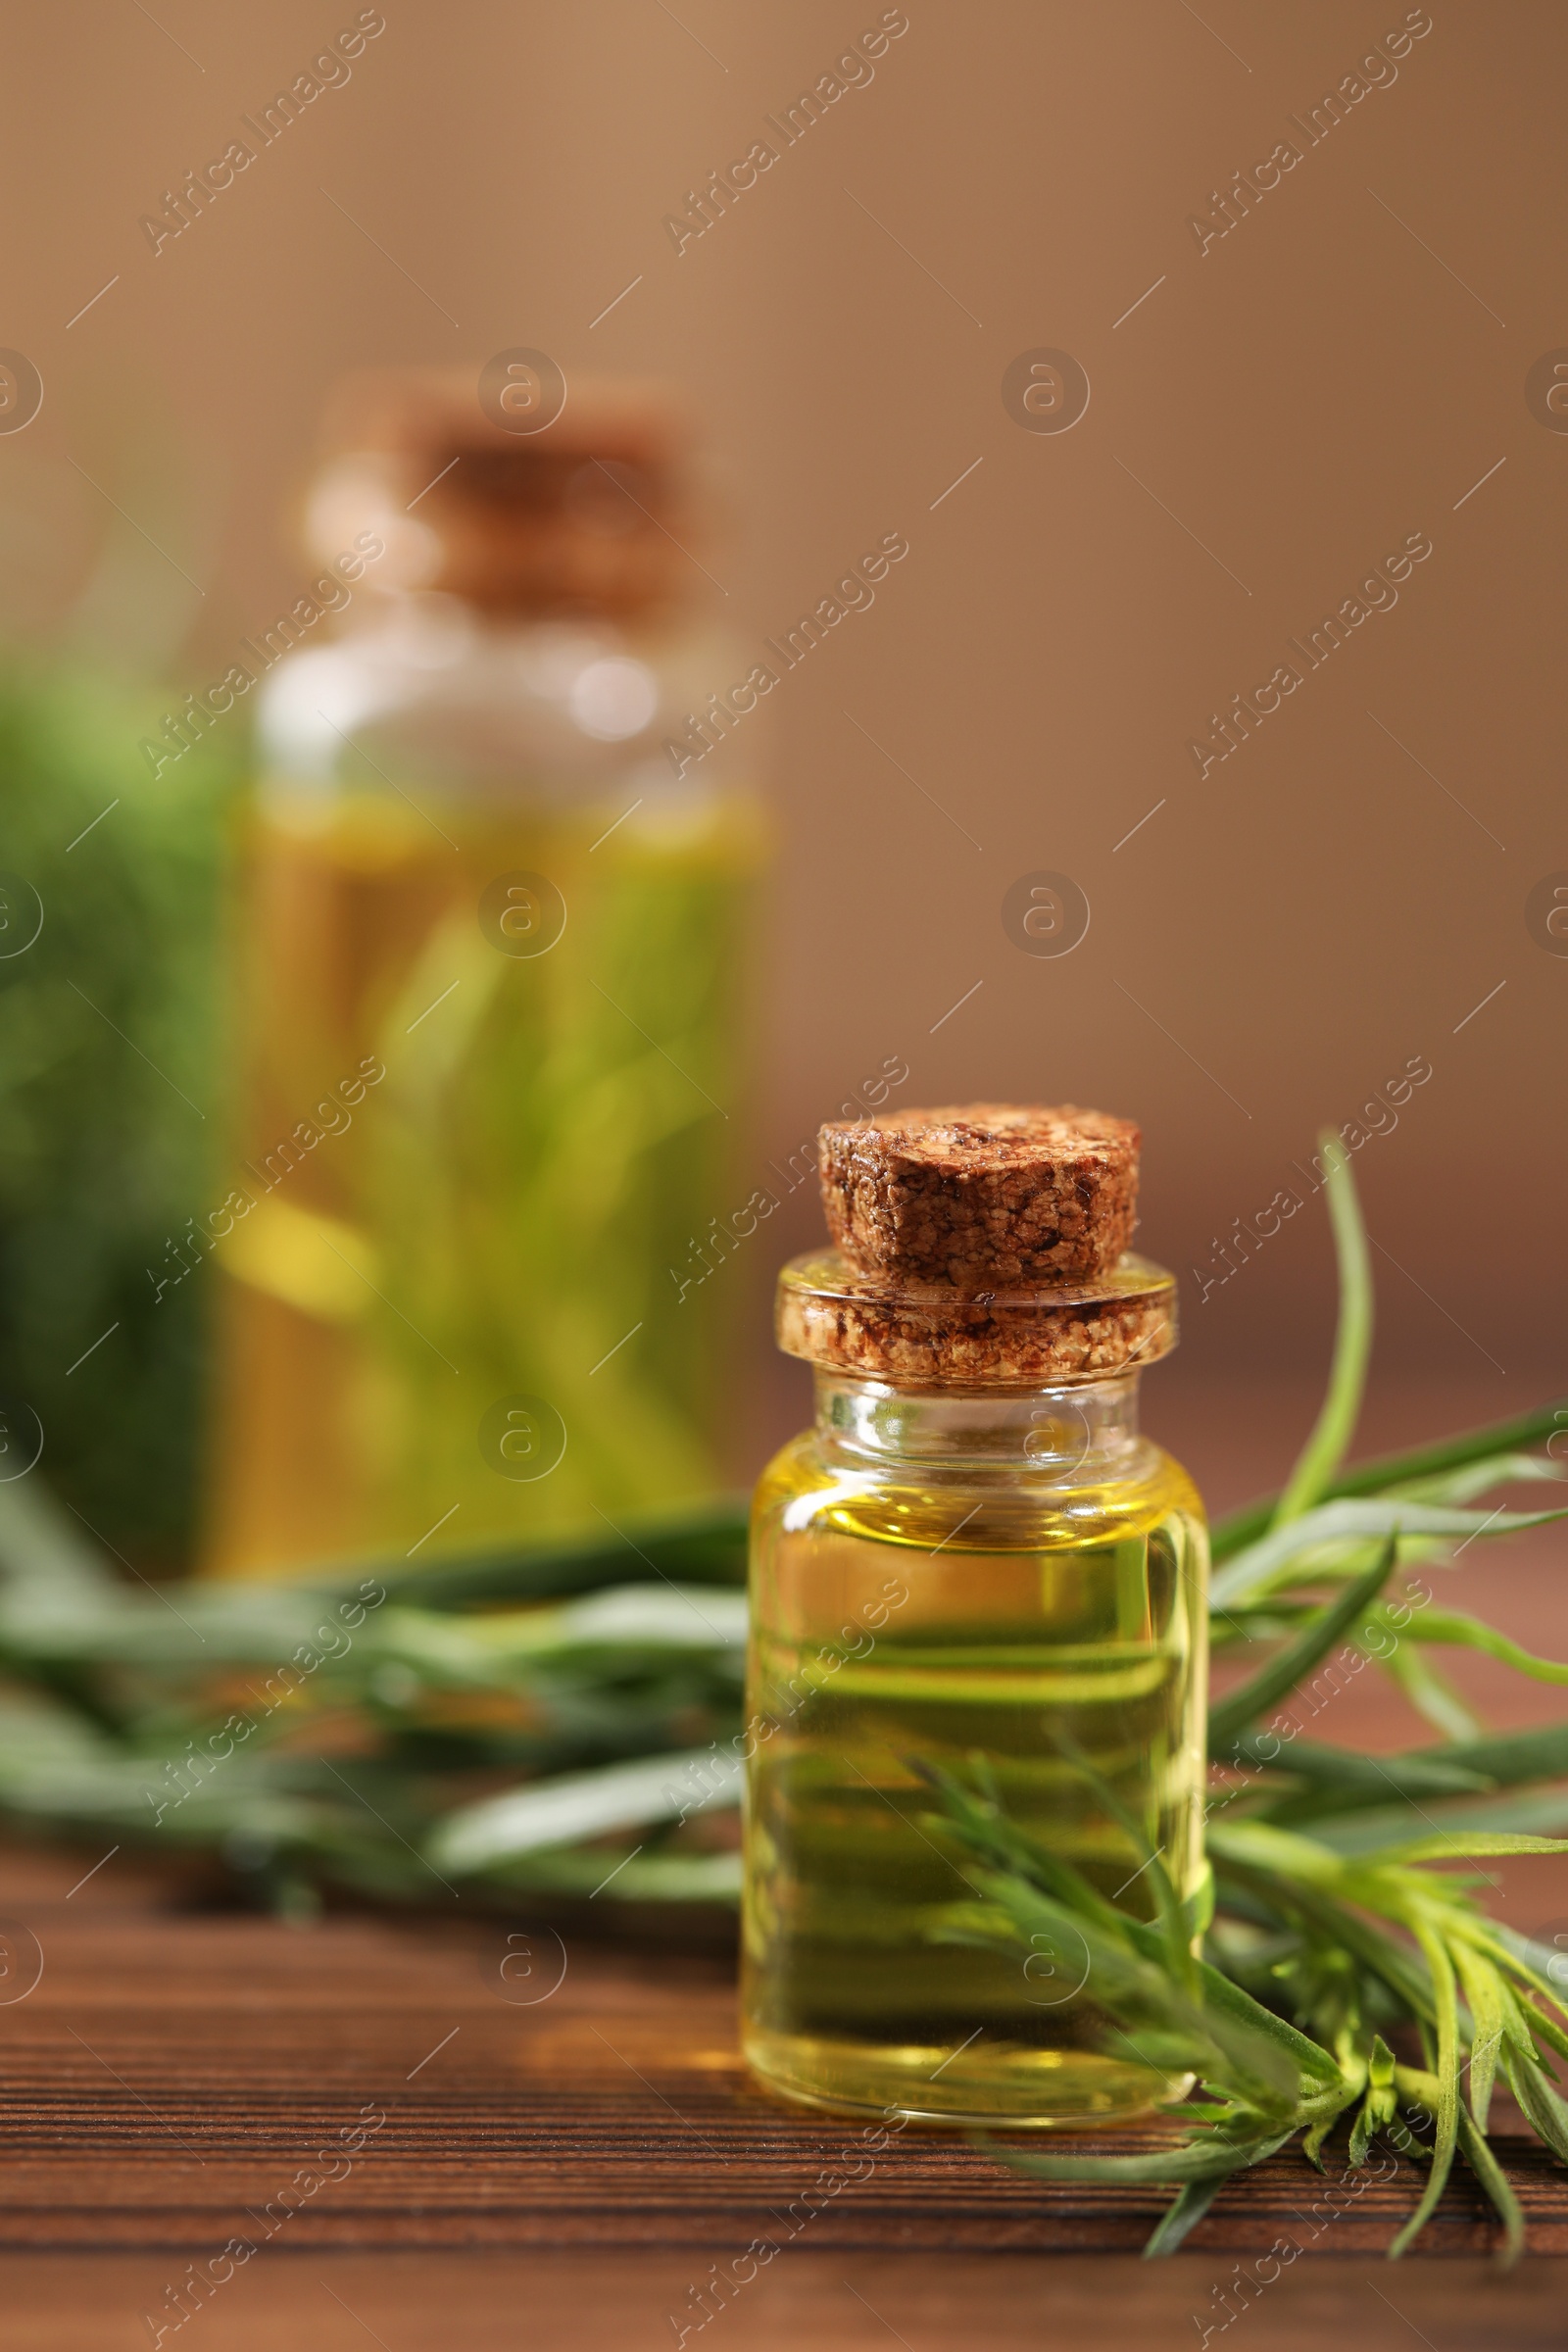 Photo of Bottle of essential oil and fresh tarragon leaves on wooden table